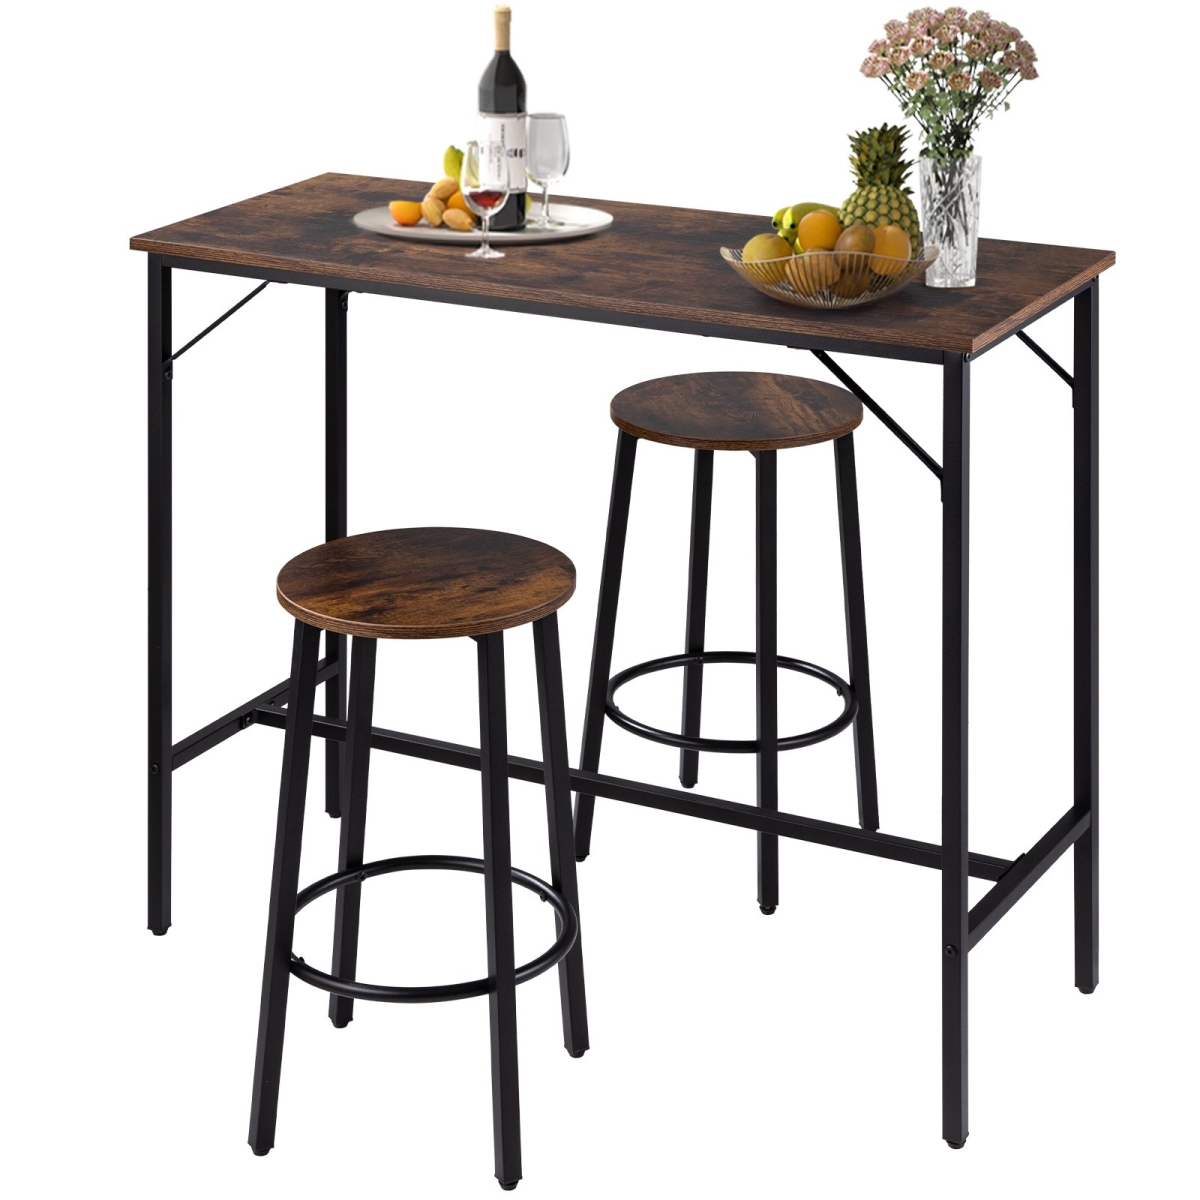 Picture of Vevor FZYDTMBTZYJTZLNGTV0 39 in. Bar Table & Chairs Pub Table Set with 2 Bar Stools Kitchen Dining Table & Chairs - Set for 2